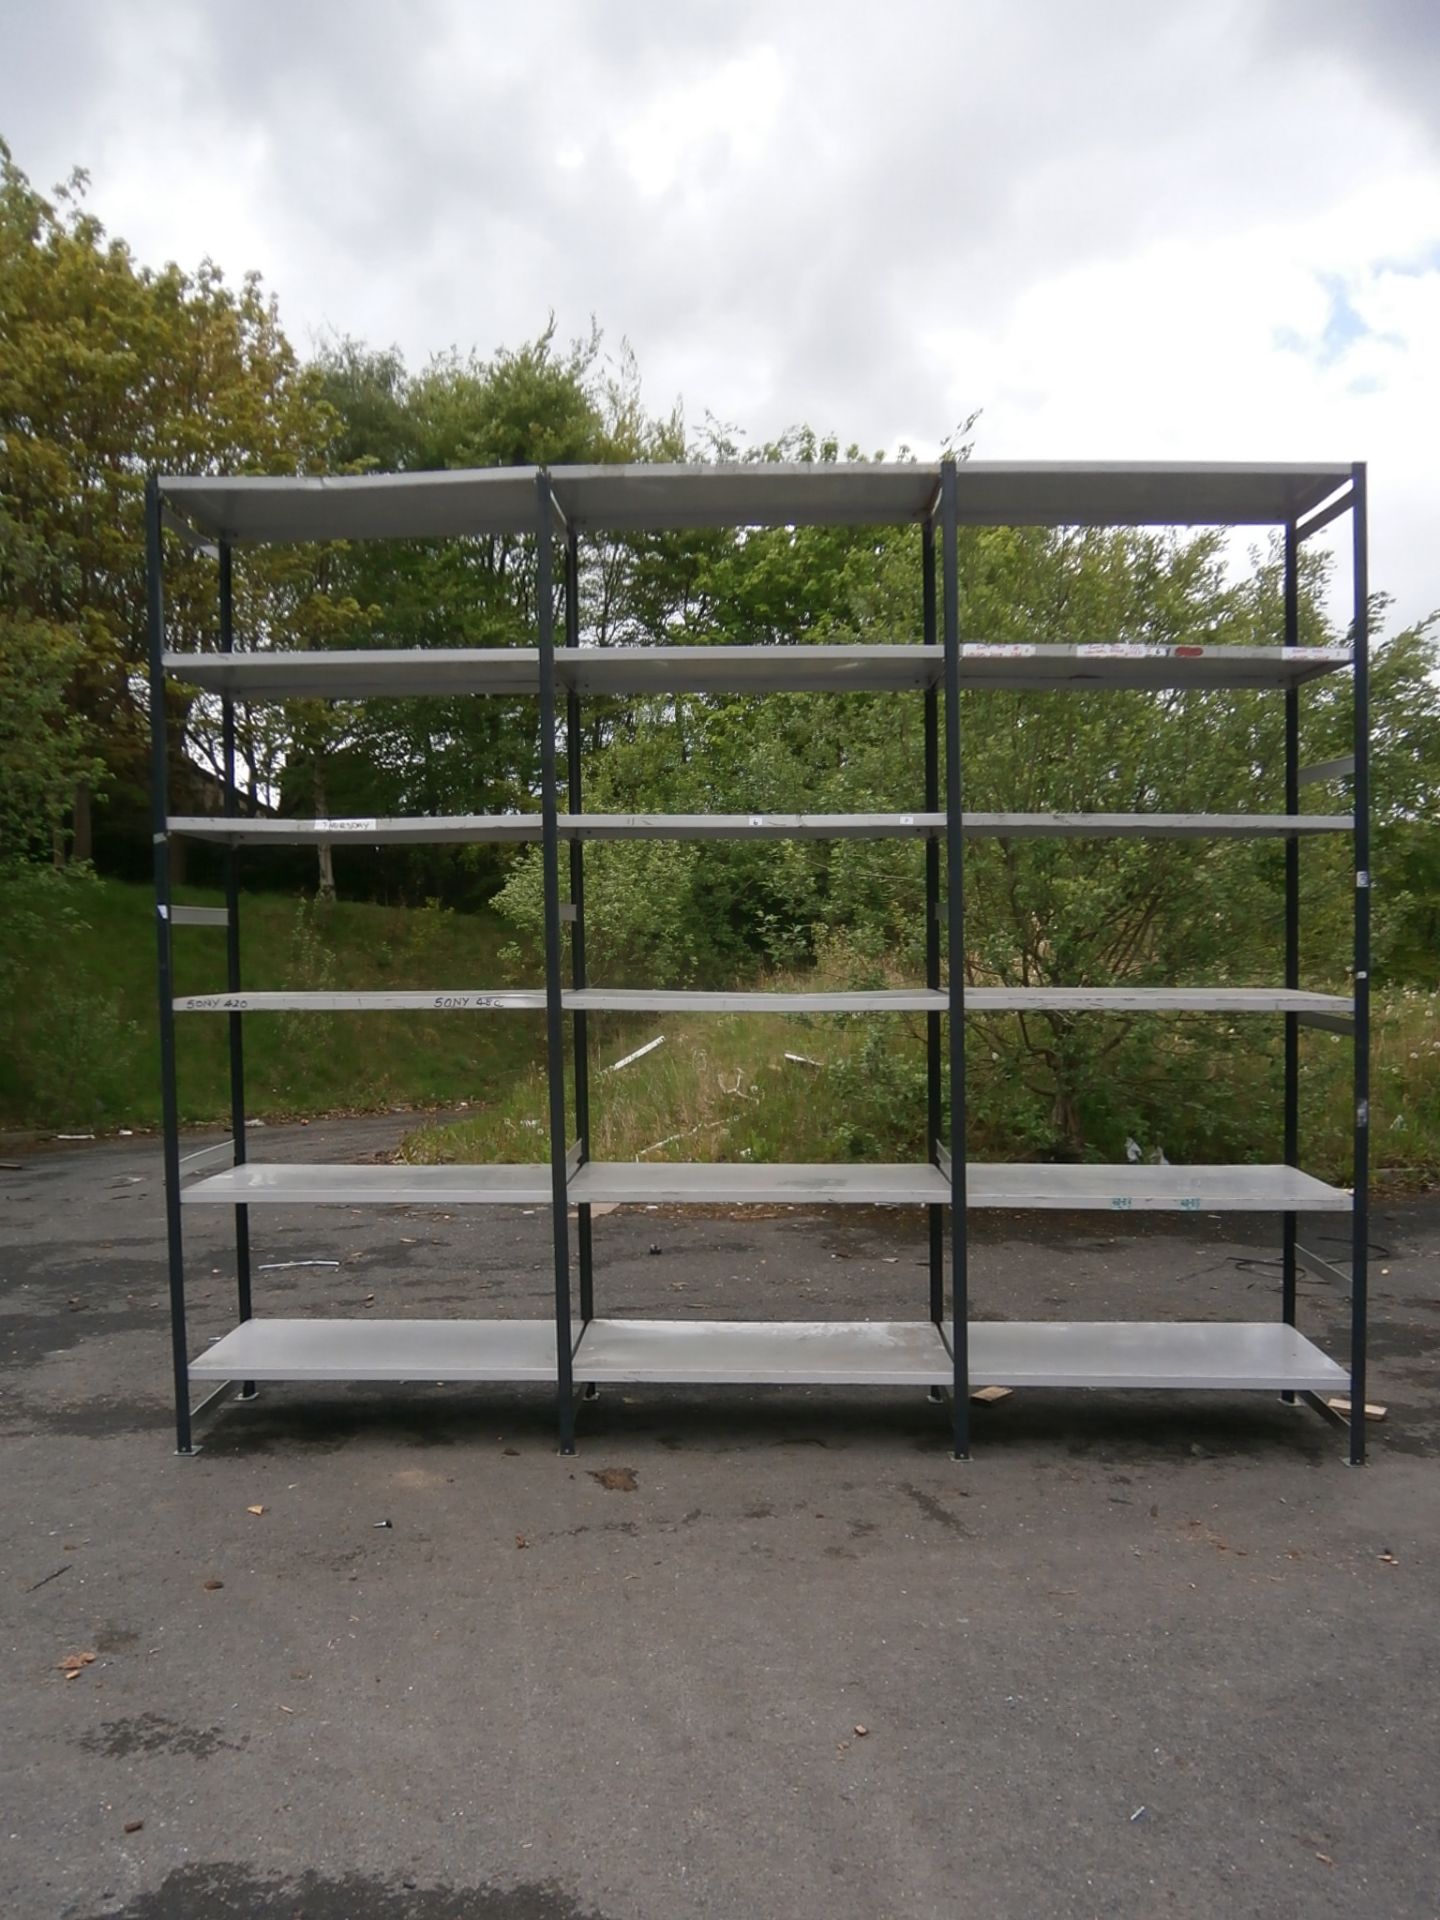 3 x Bays of Boltless Archive Shelving - Includes 4 x Uprights, 18 x Shelves and 72 Clips (Approx Per - Image 2 of 4